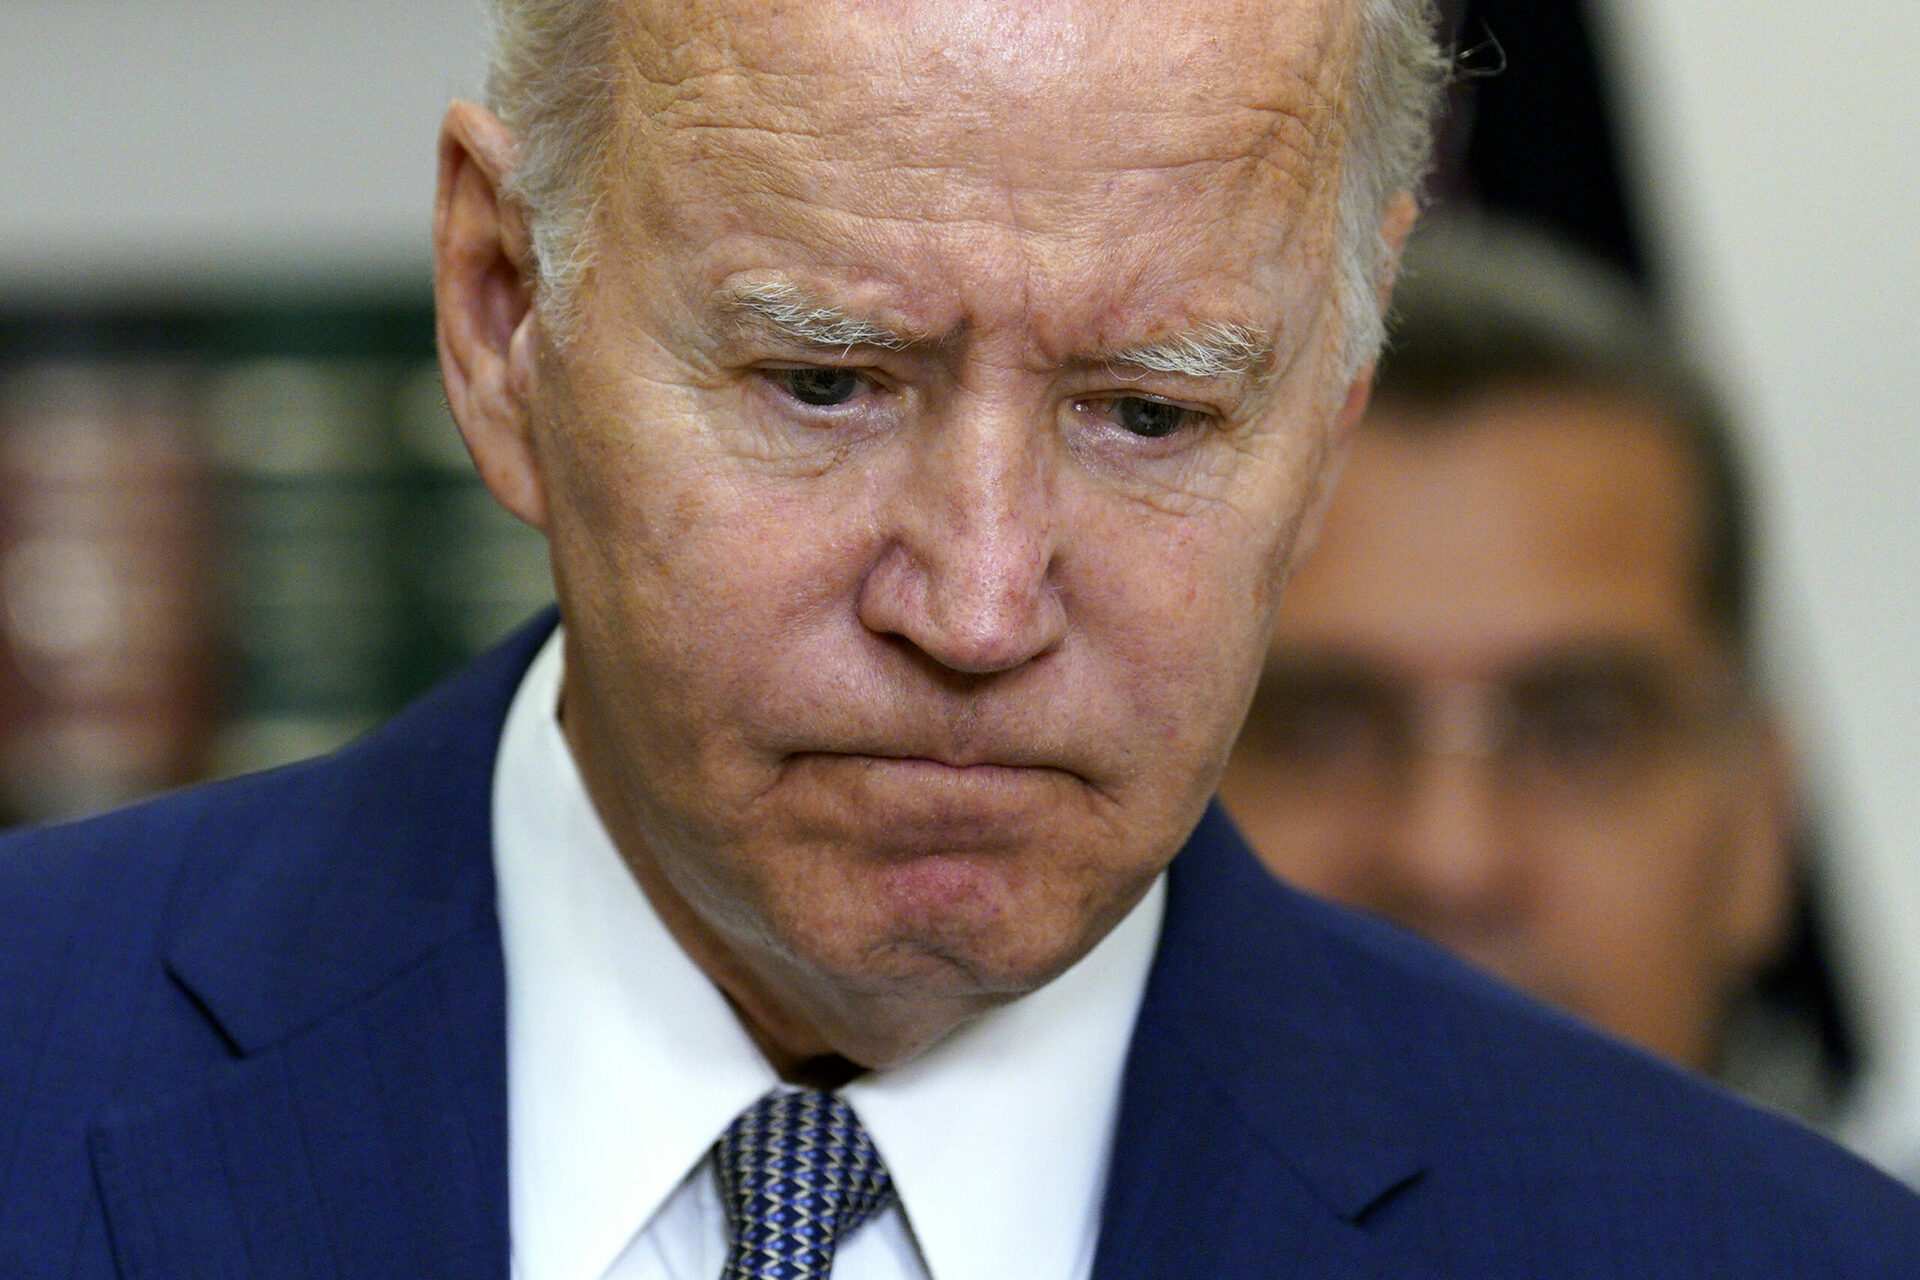 Is Biden’s CIA Director too close to China’s Communist Party?